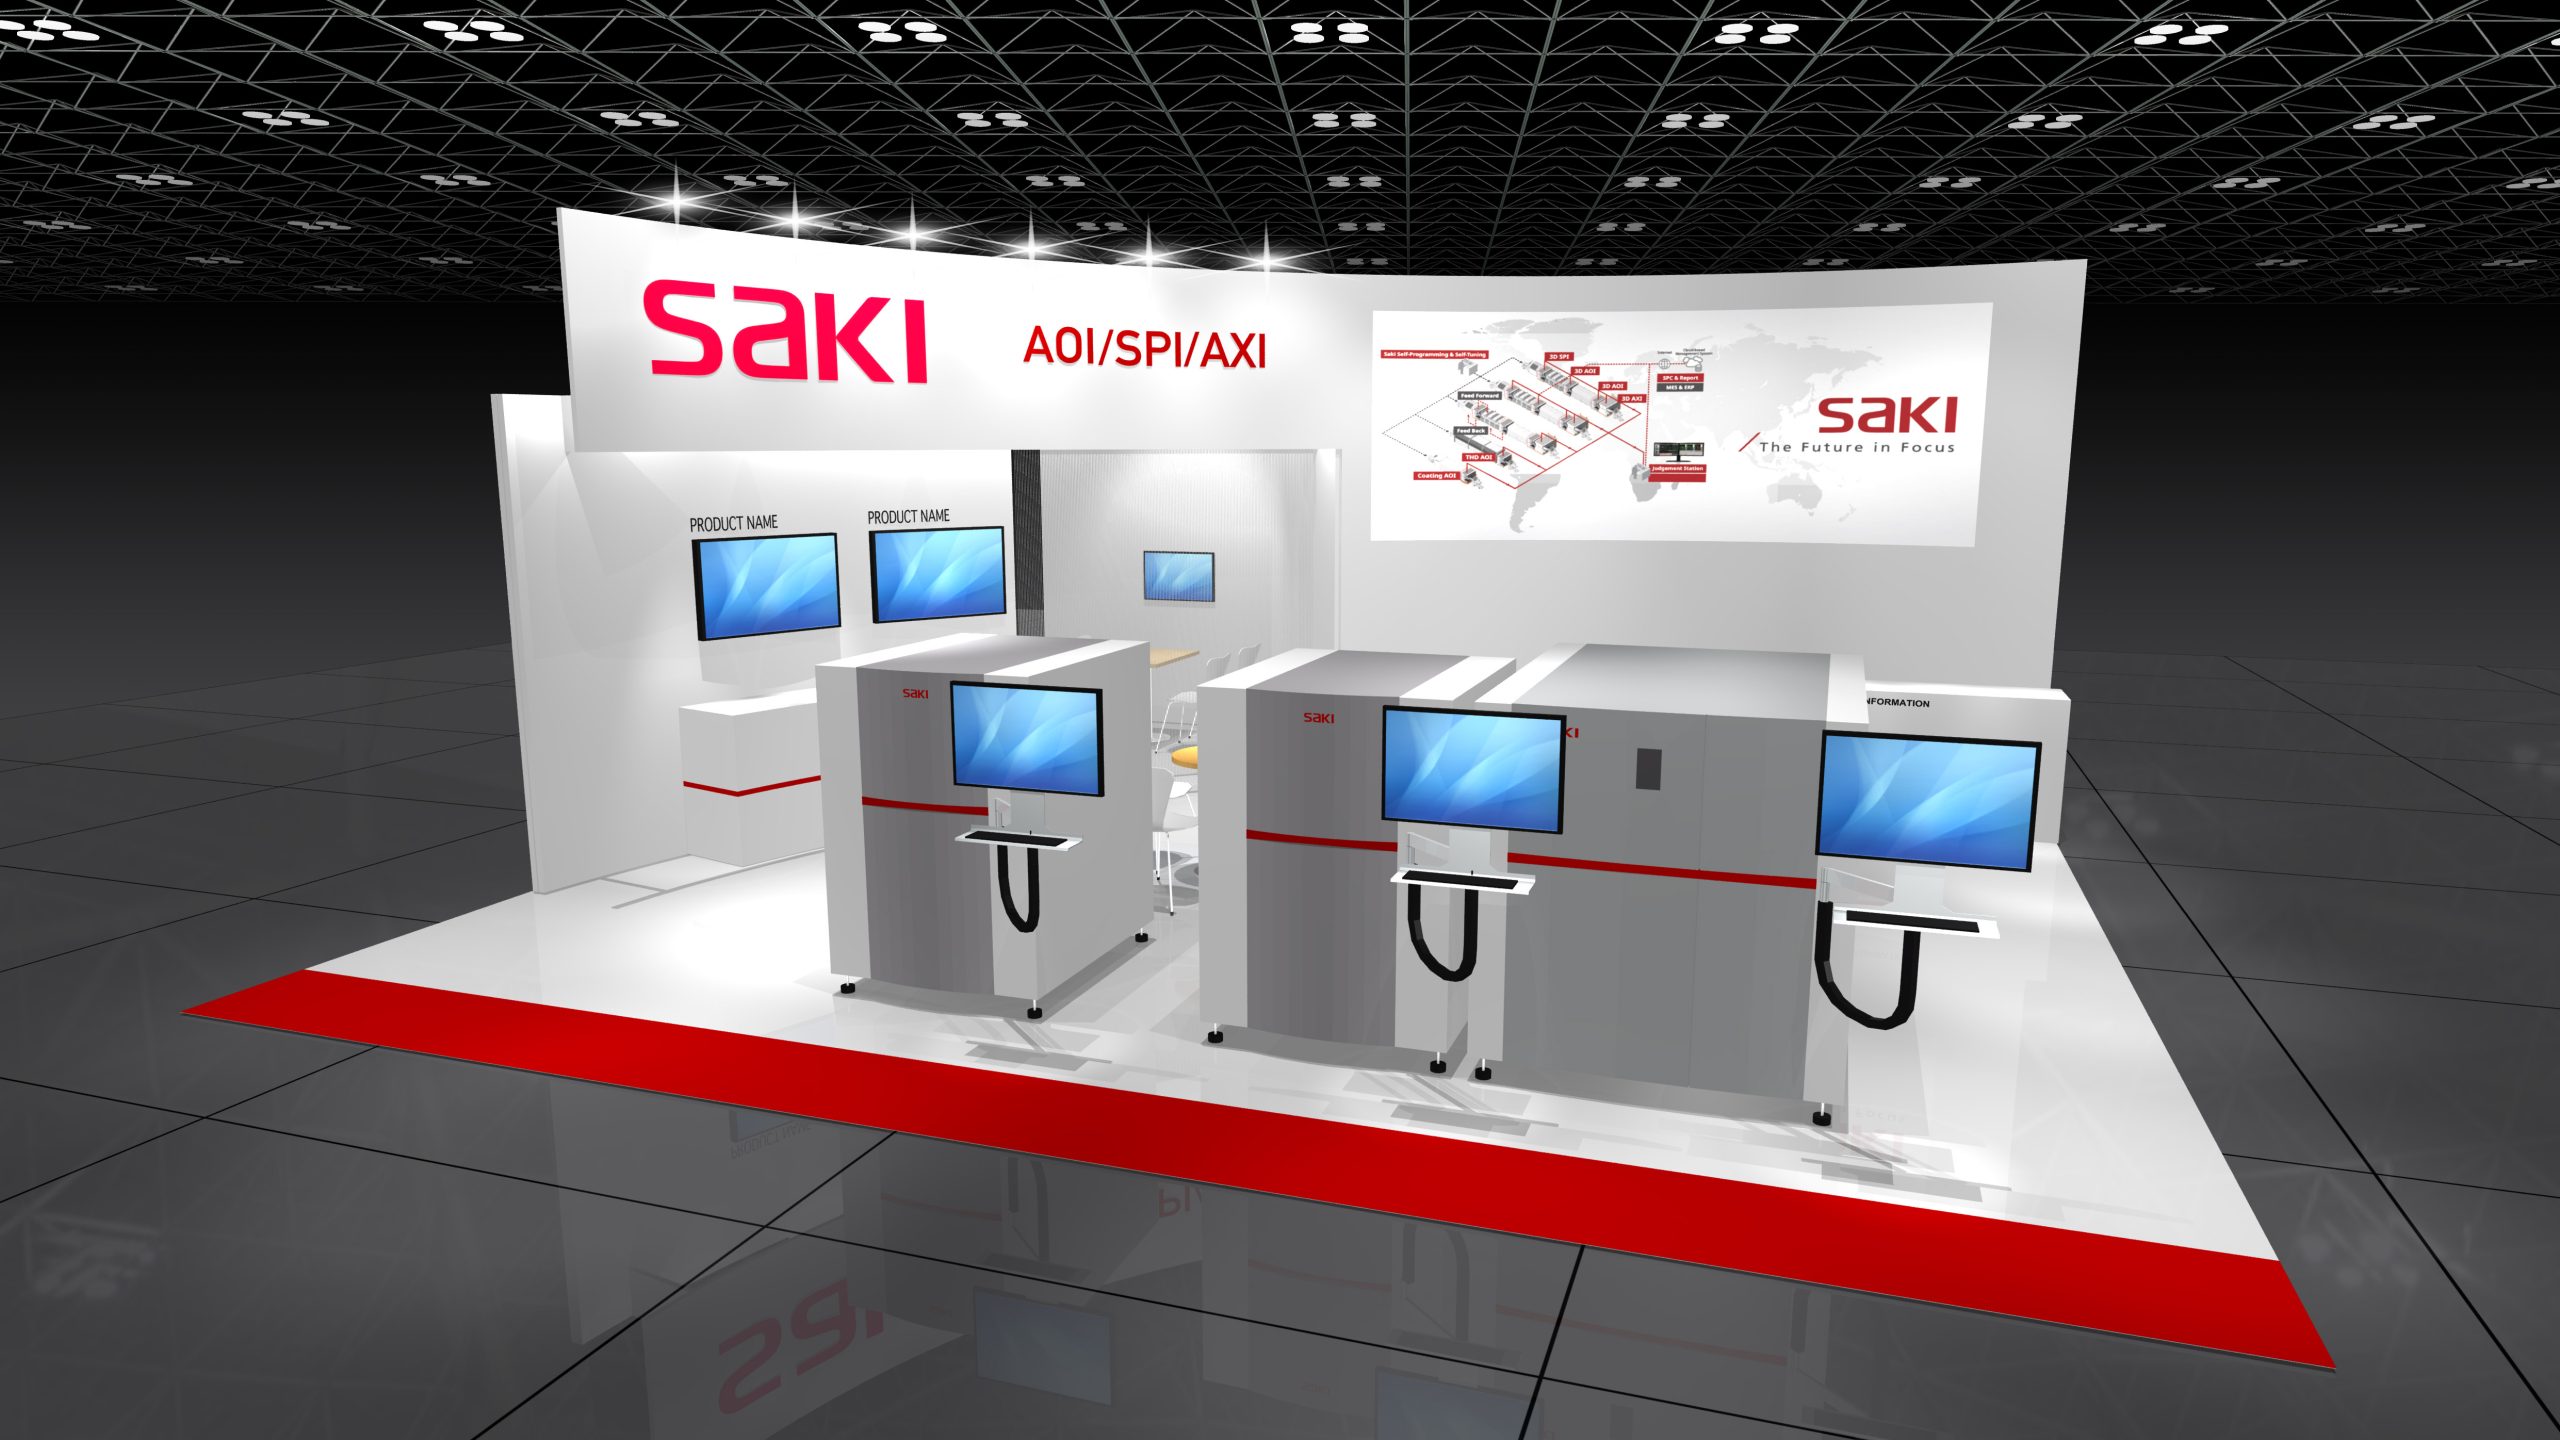 Saki to Demonstrate 3D-AOI and 3D-AXI Live at 37th NEPCON JAPAN